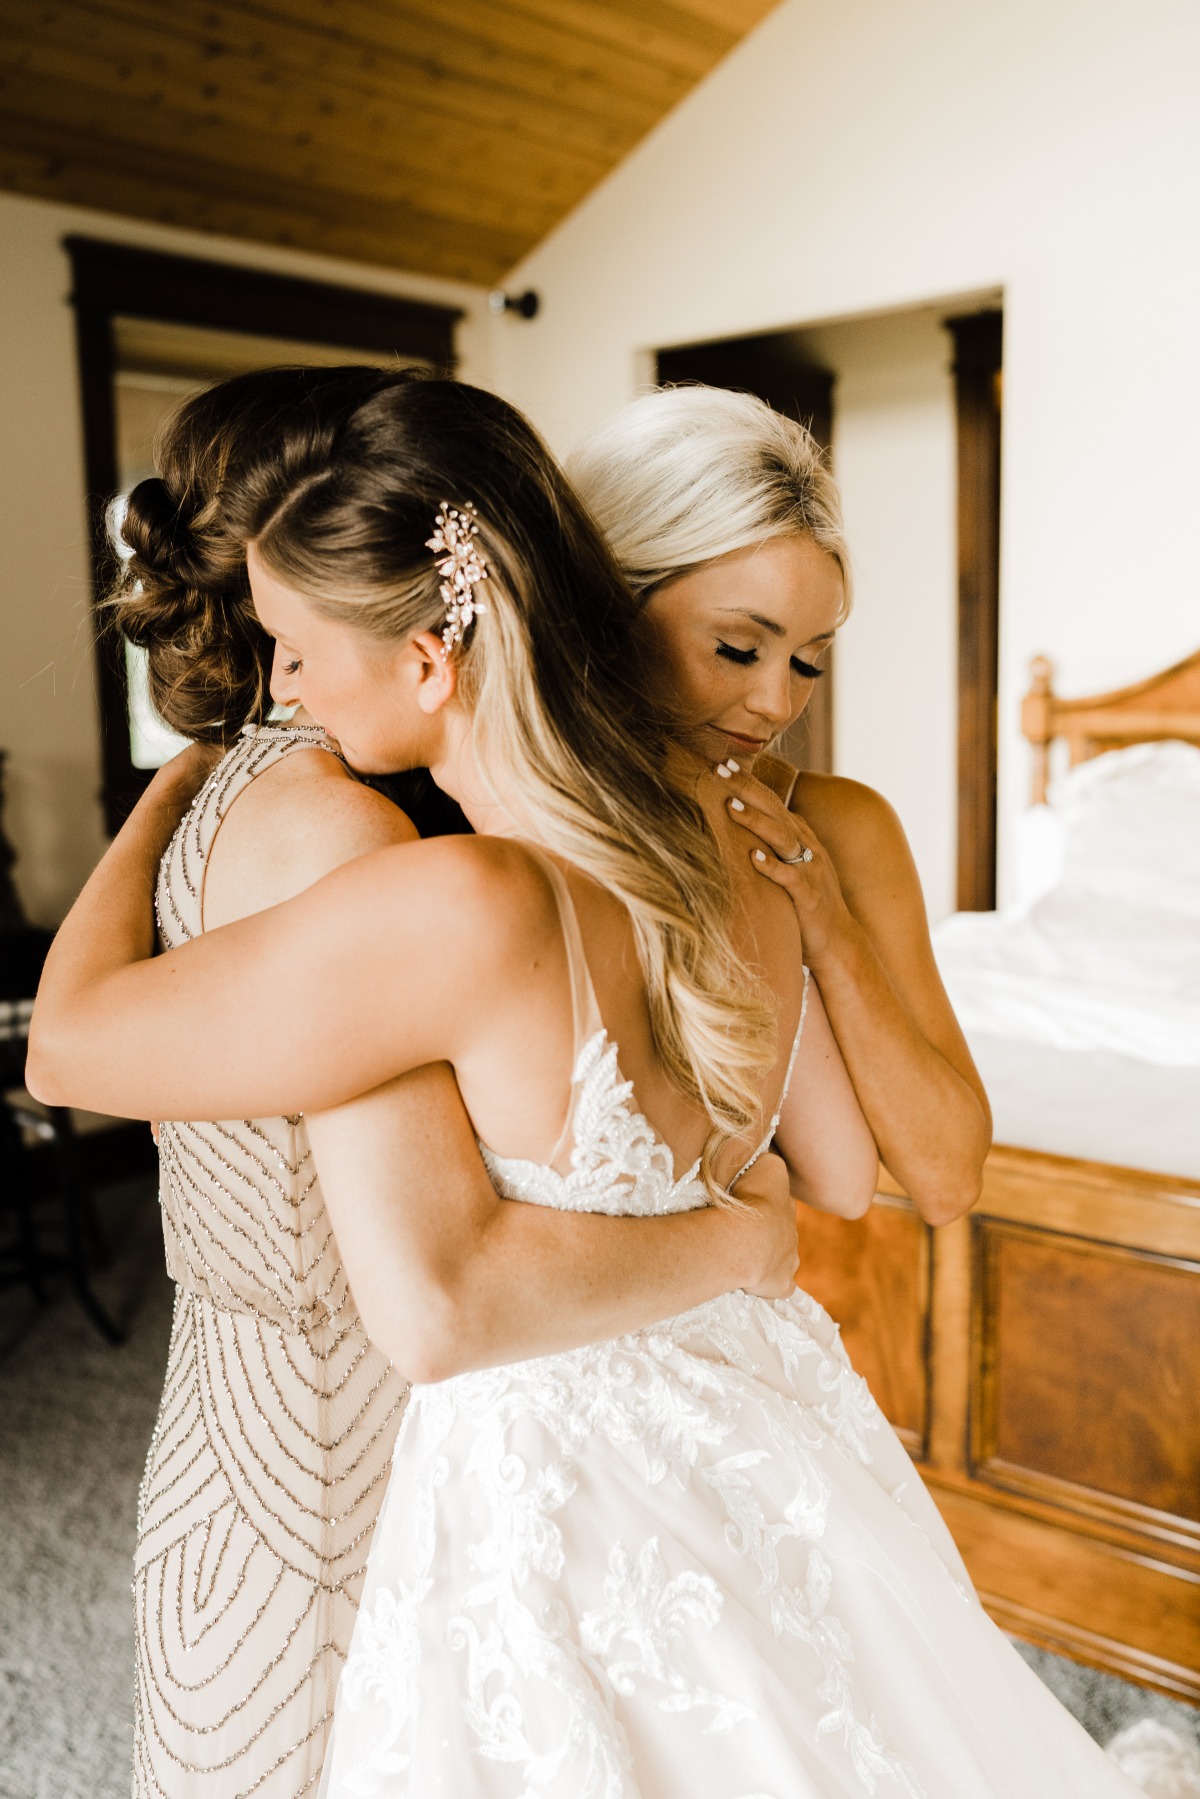 getting ready pose ideas with bridal party